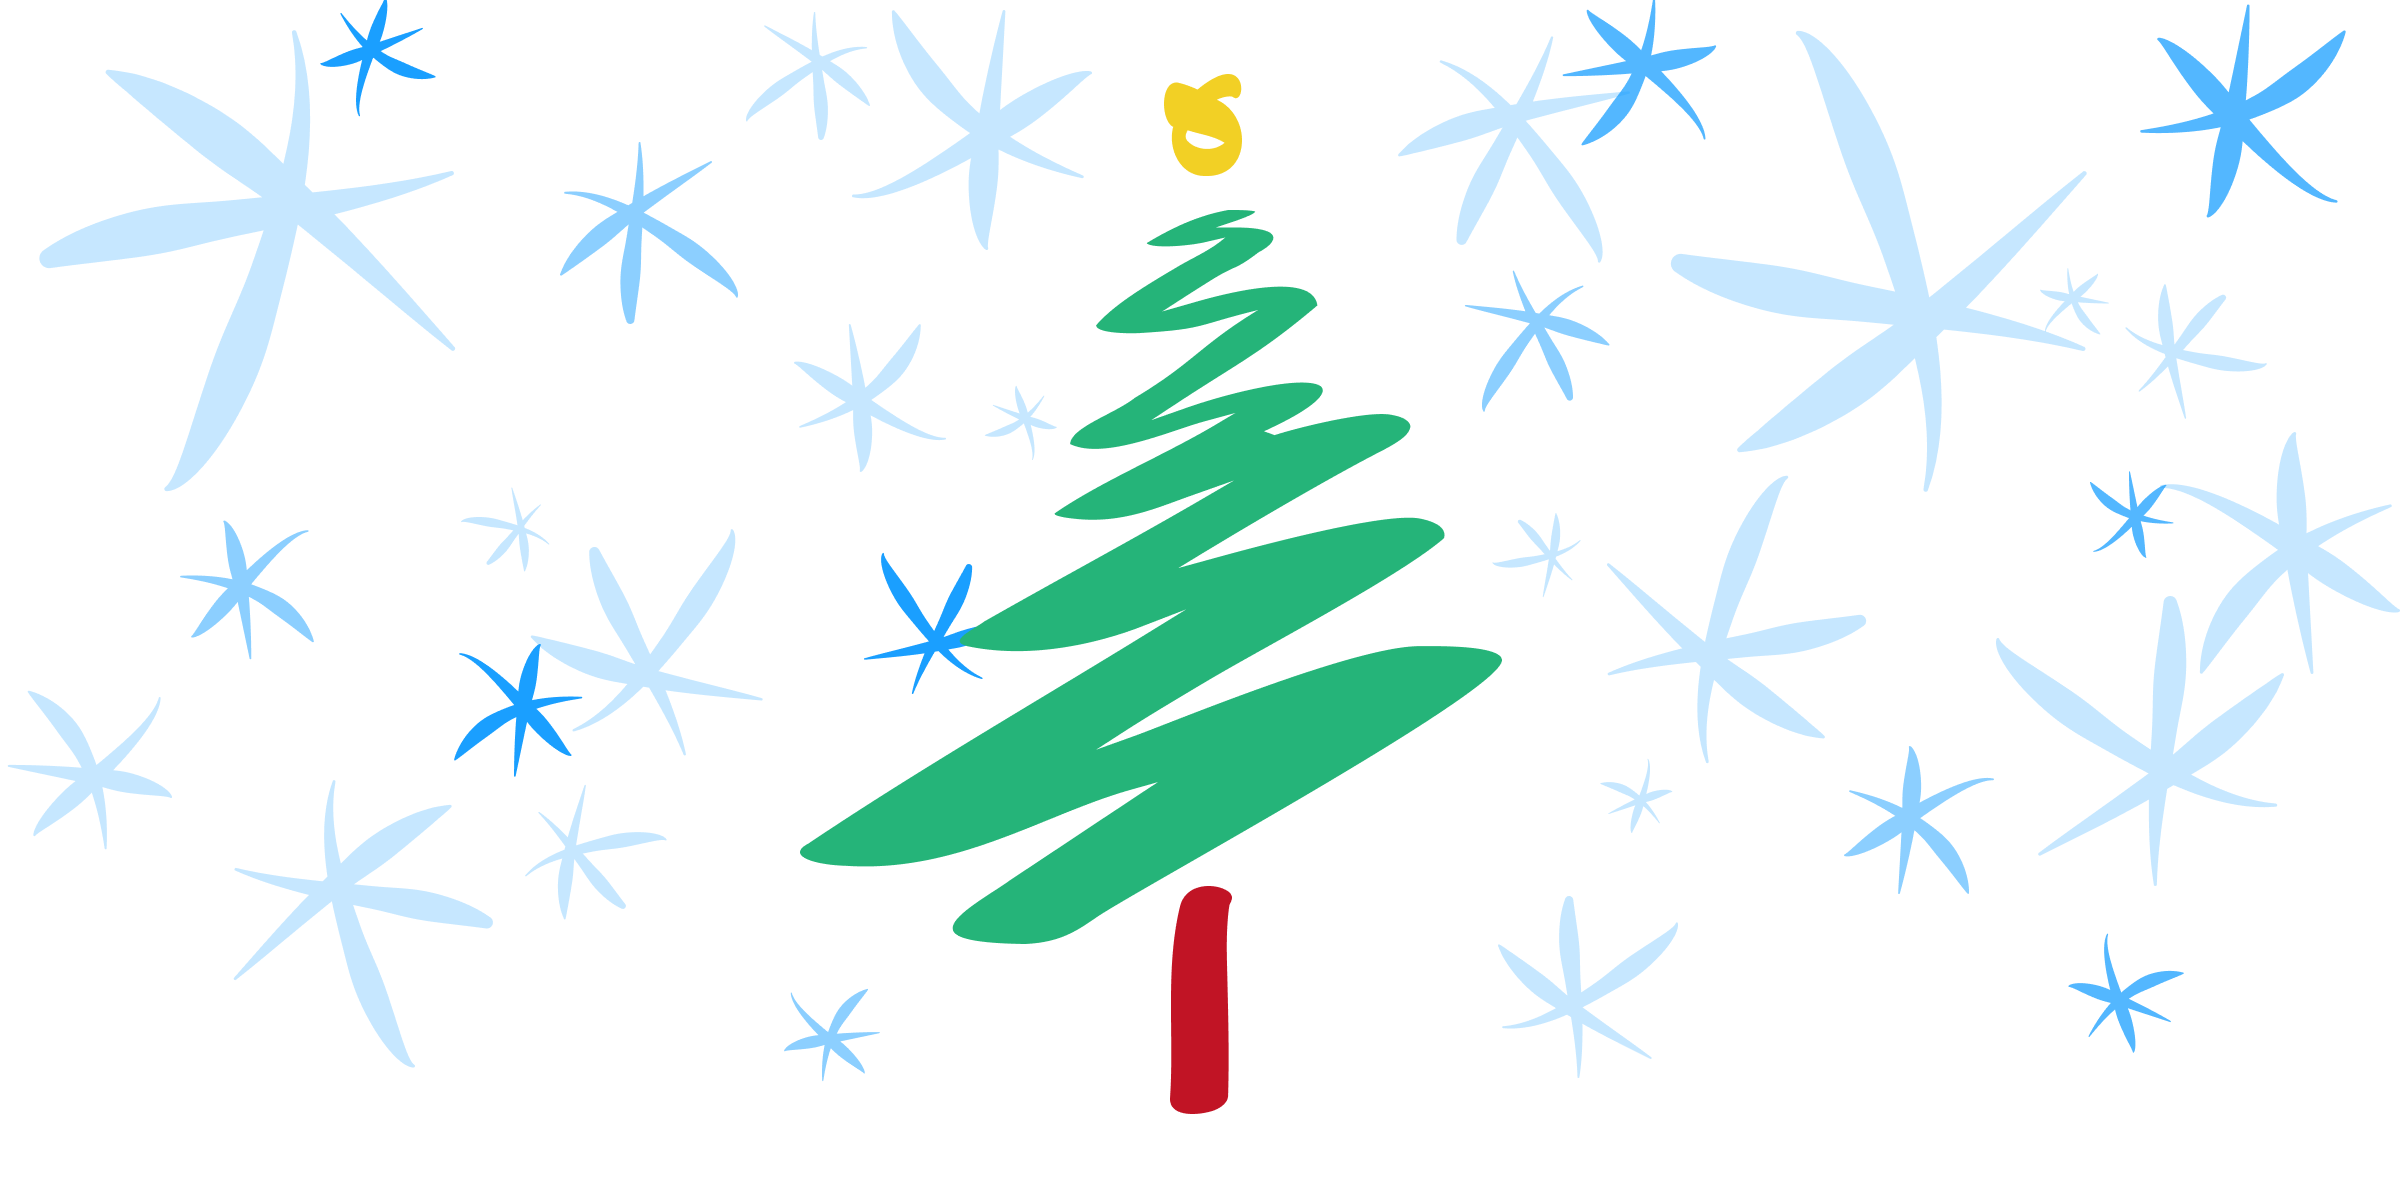 A hand-drawn Christmas tree with blue snowflakes around it